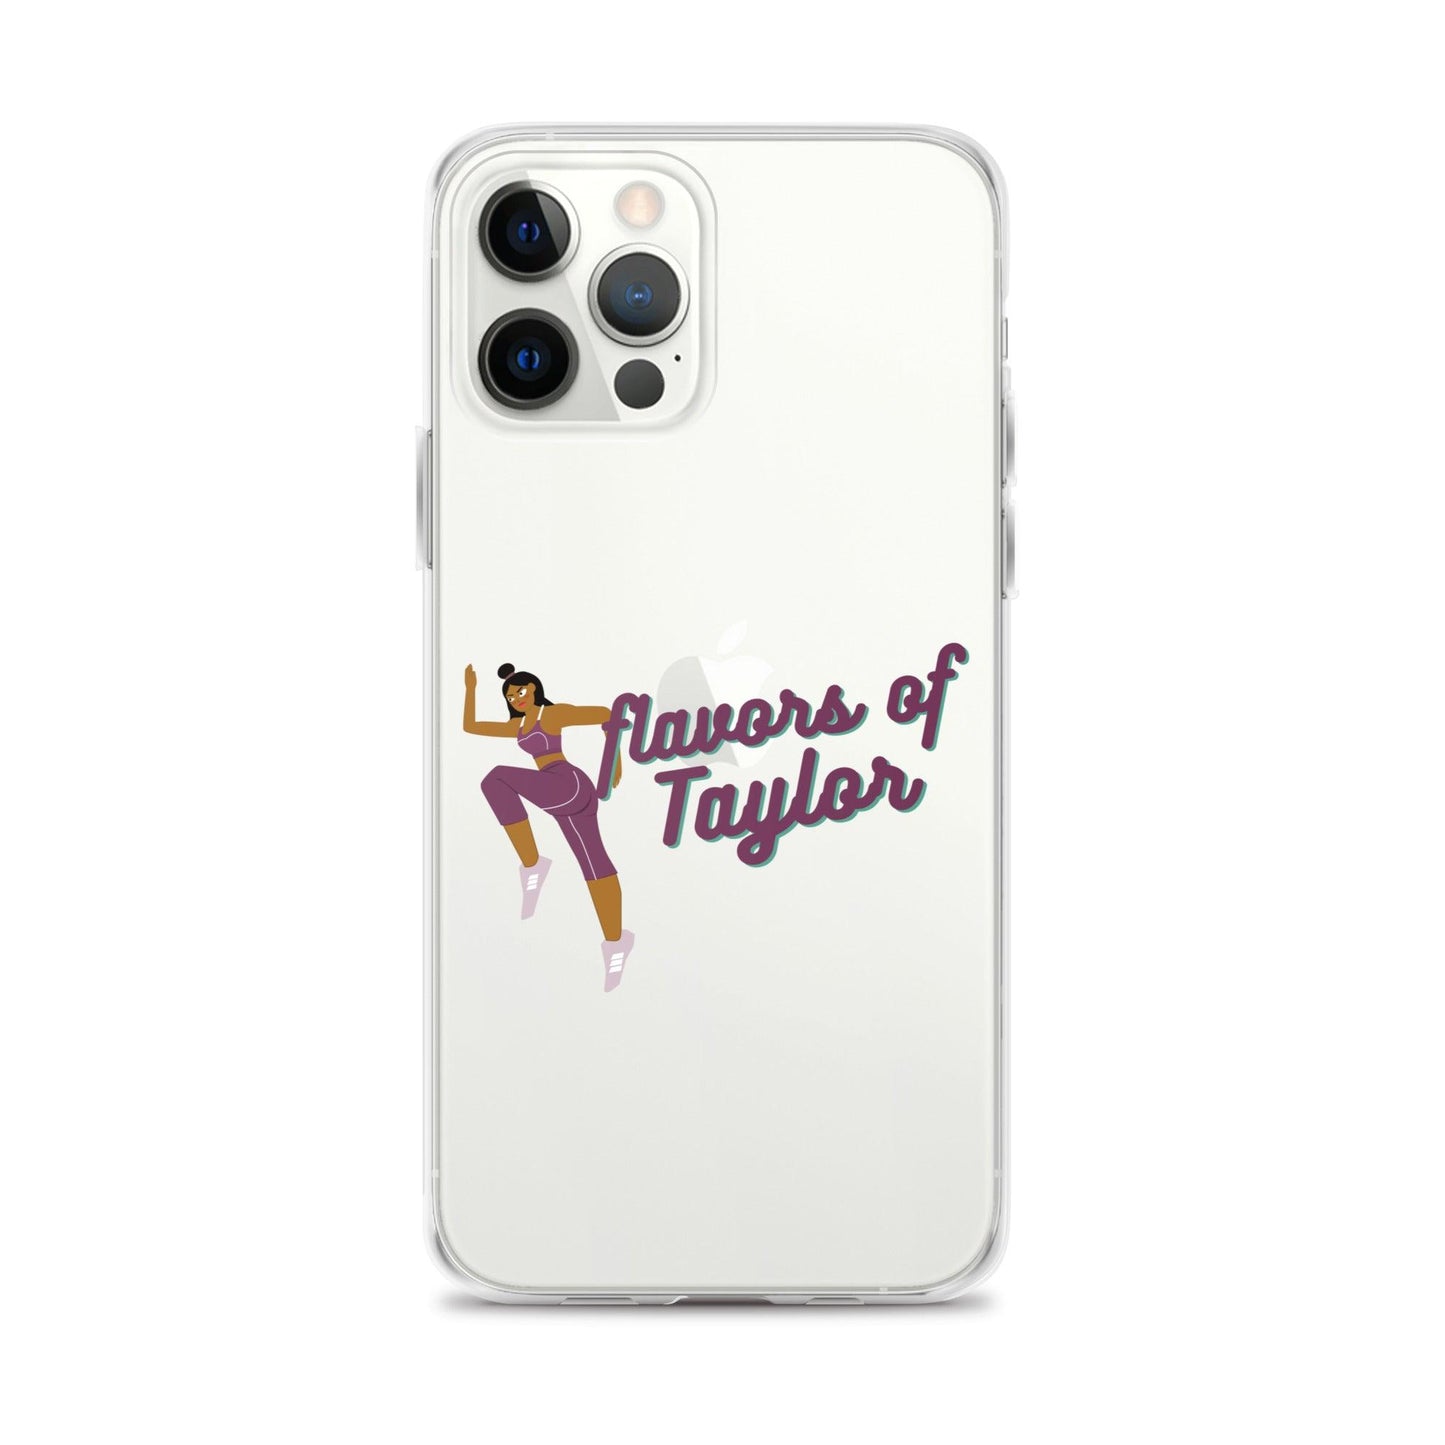 Taylor Anderson "Flavors" iPhone Case - Fan Arch